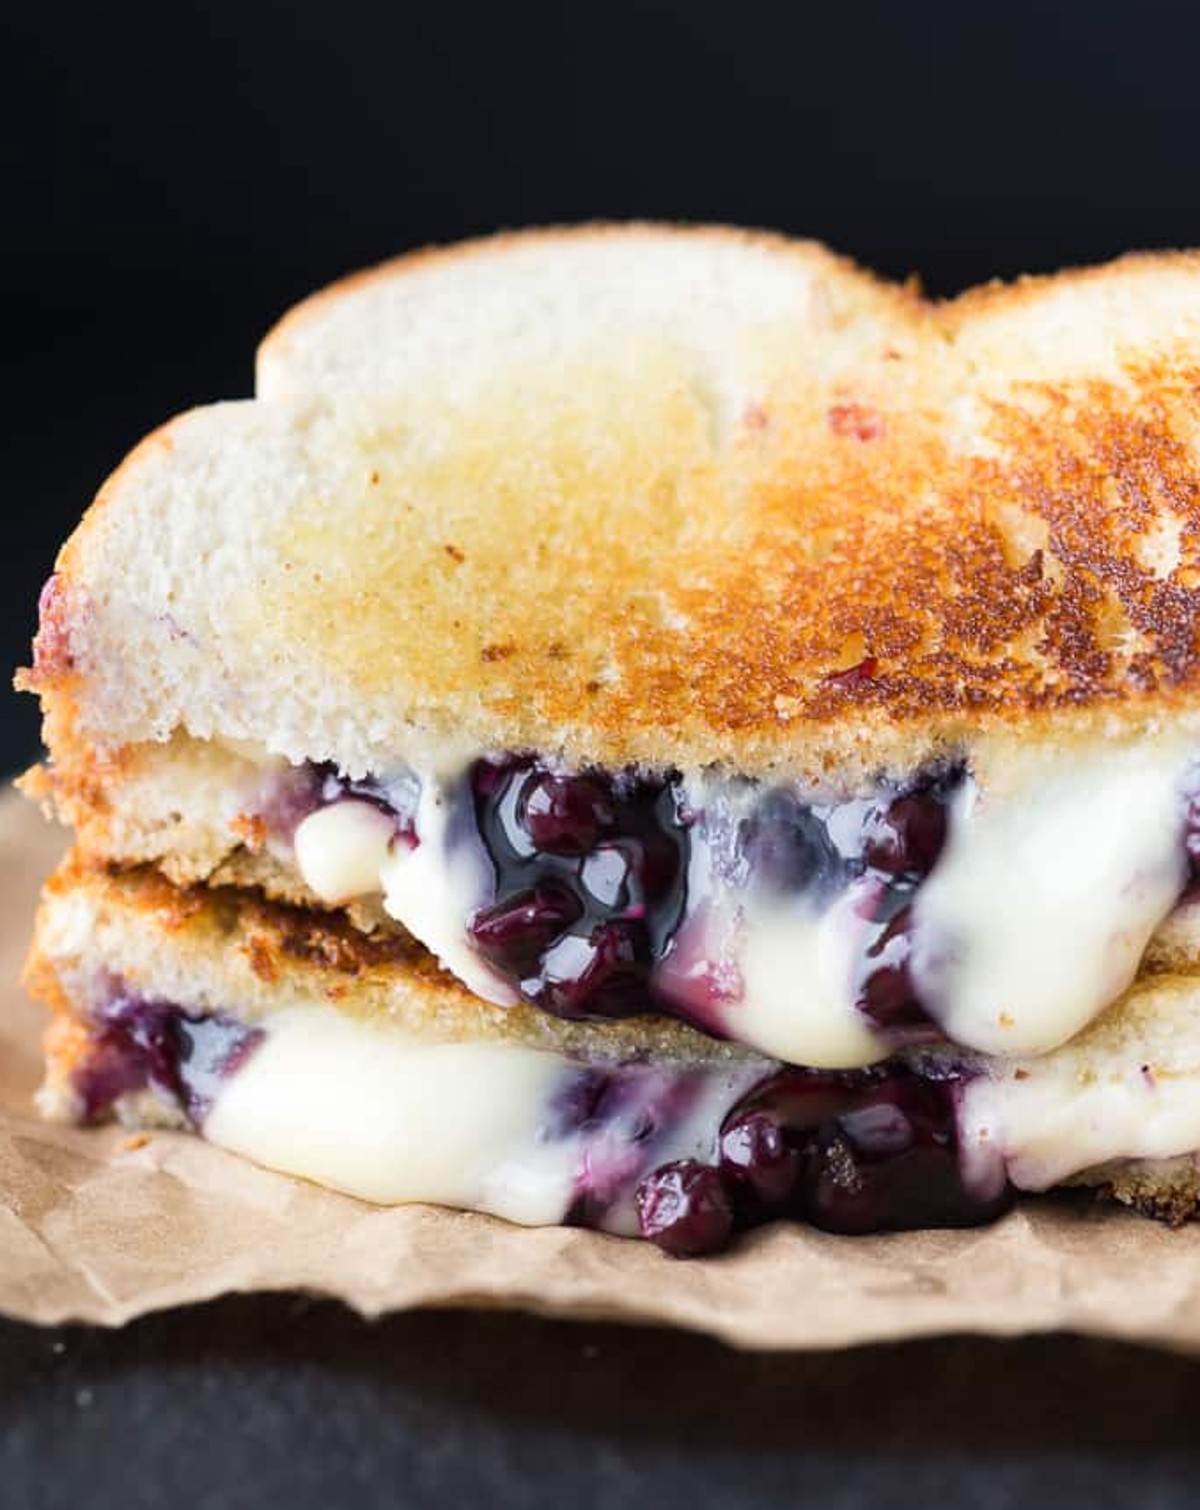 Blueberry Brie Grilled Cheese Sandwich